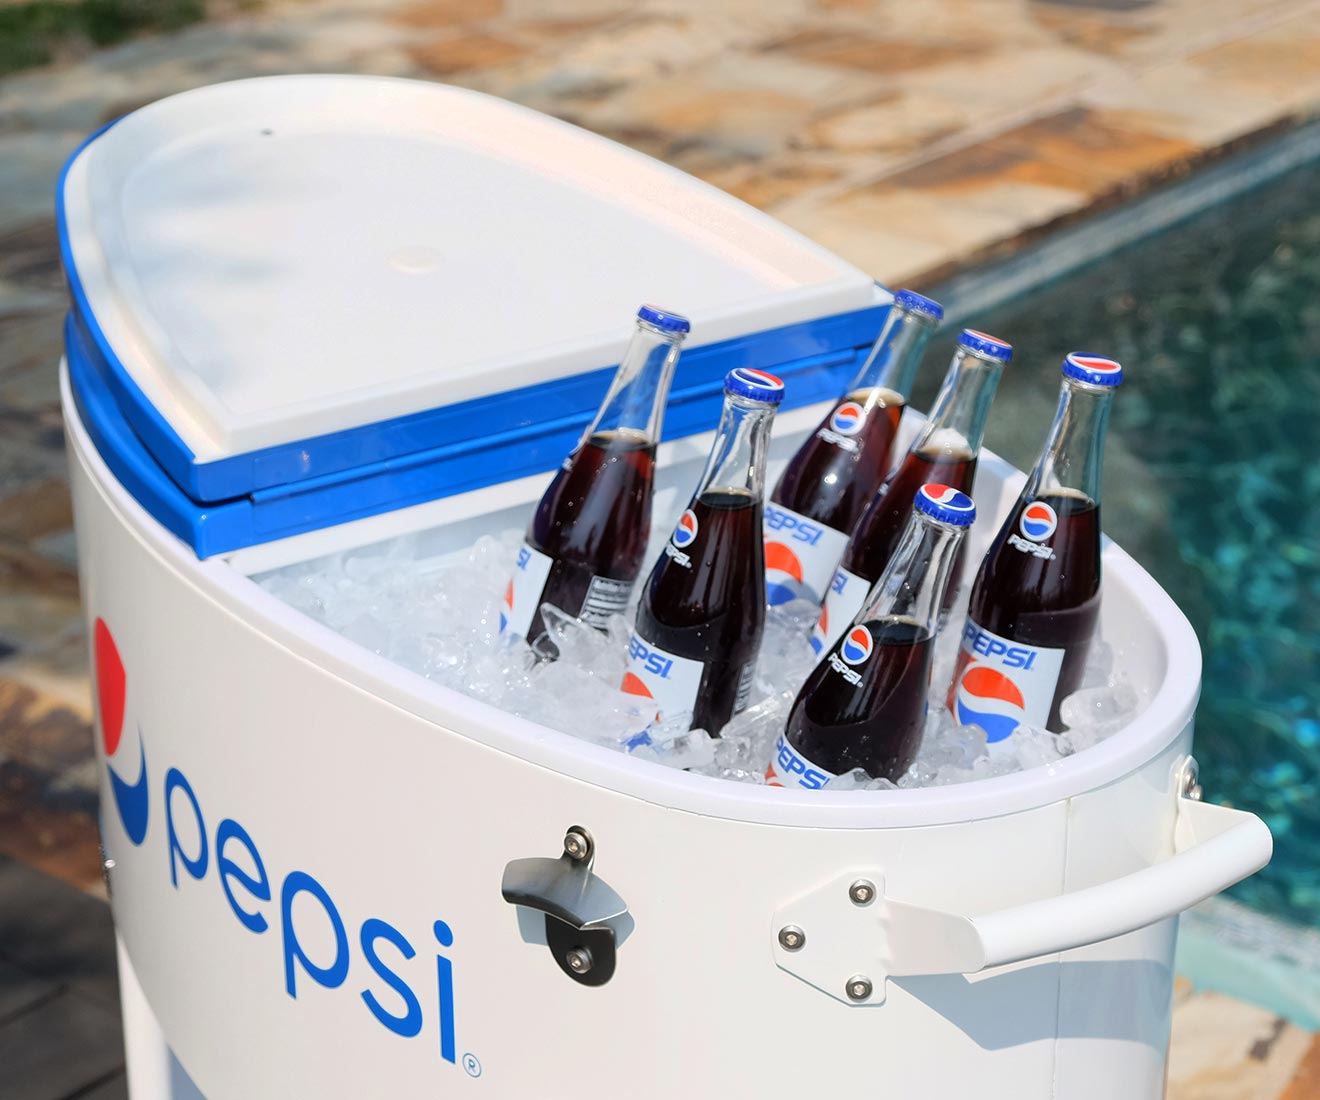 Pepsi Cooler 80 Quart Outdoor Patio Cooler Made by Permasteel Large Storage Capacity Drinks Refreshments Ice Cold